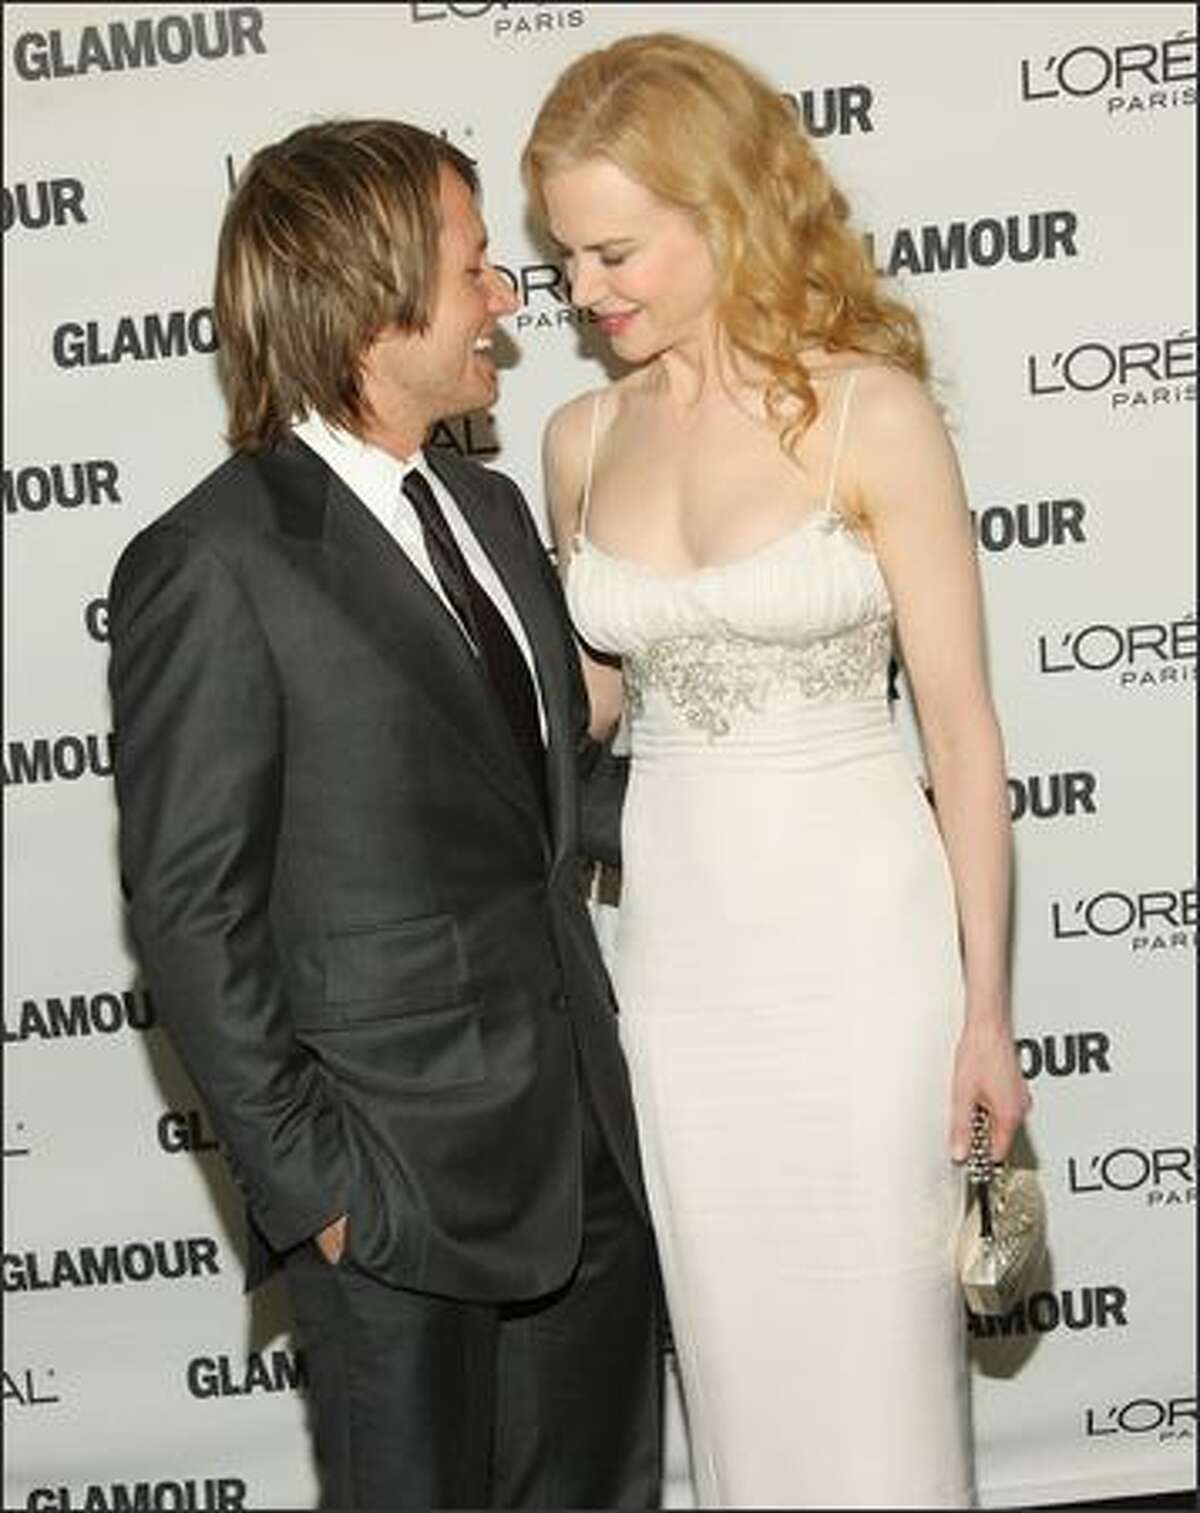 Singer/musician Keith Urban and wife actress Nicole Kidman attend the 2008 Glamour Women of the Year Awards at Carnegie Hall in New York City.